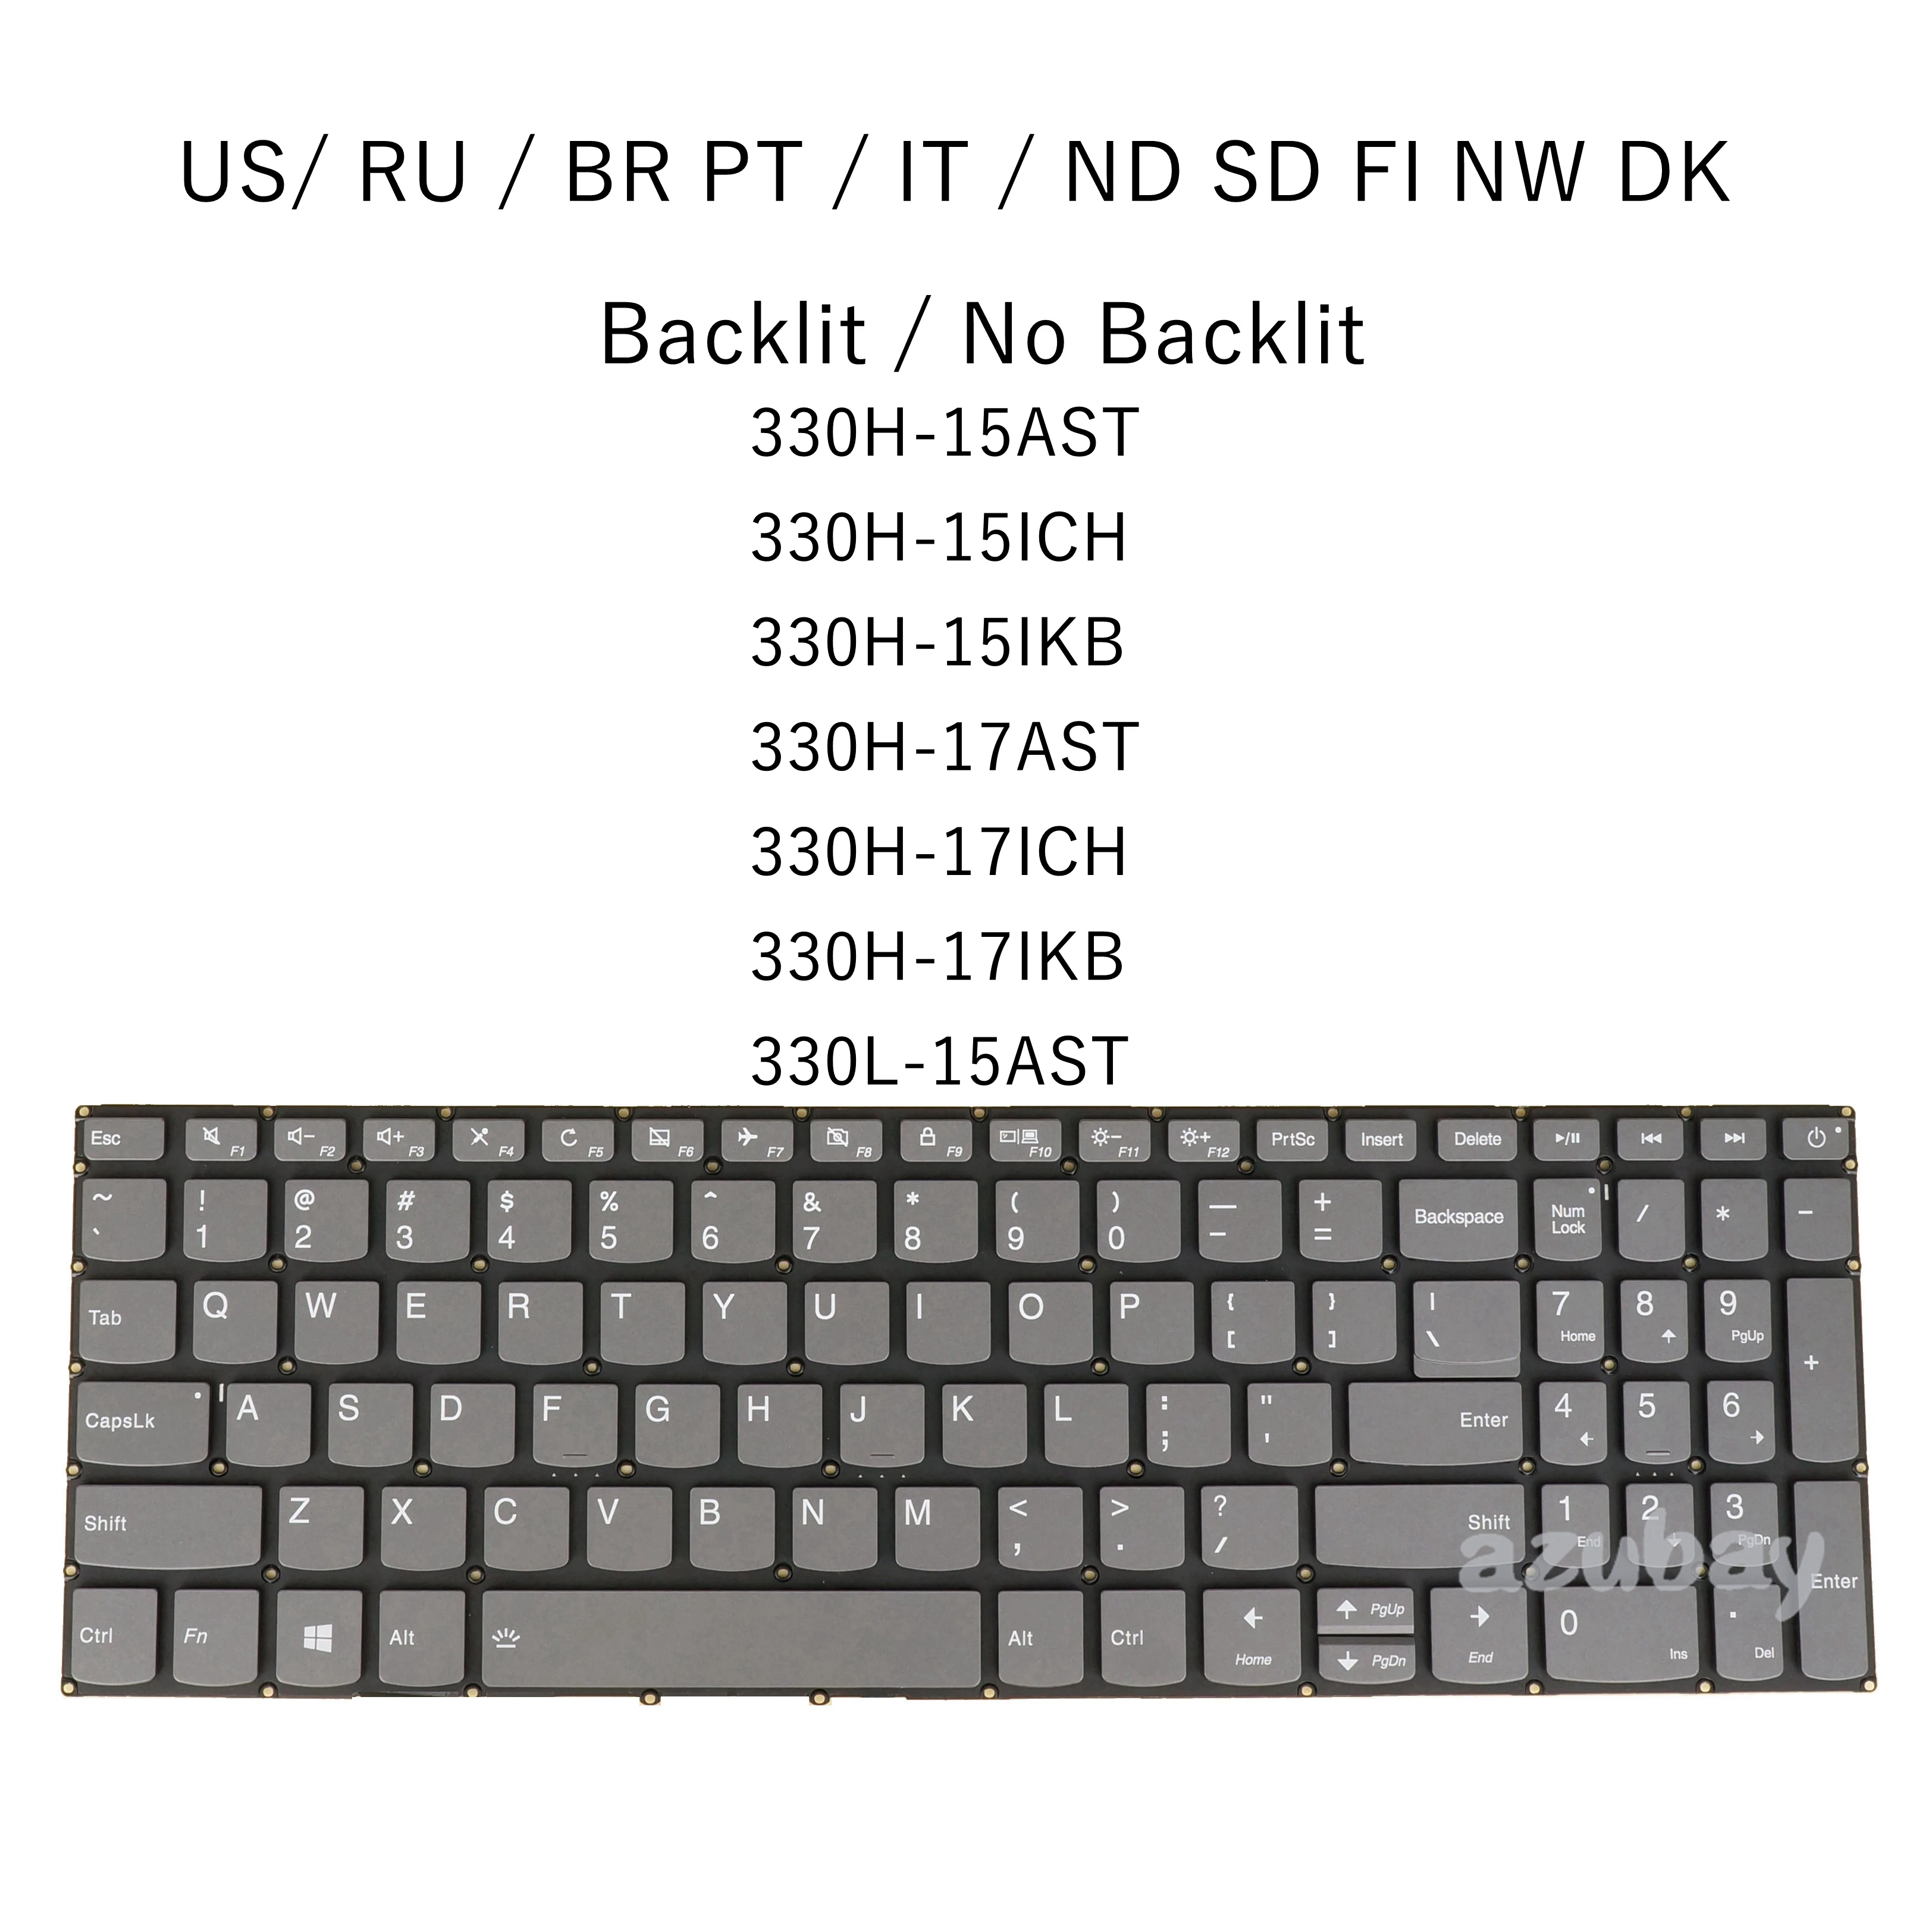 

US Russian BR PT Italian Nordic Keyboard For Lenovo 330H-15AST 330H-15ICH 330H-15IKB 330H-17AST 330H-17ICH 330H-17IKB 330L-15AST